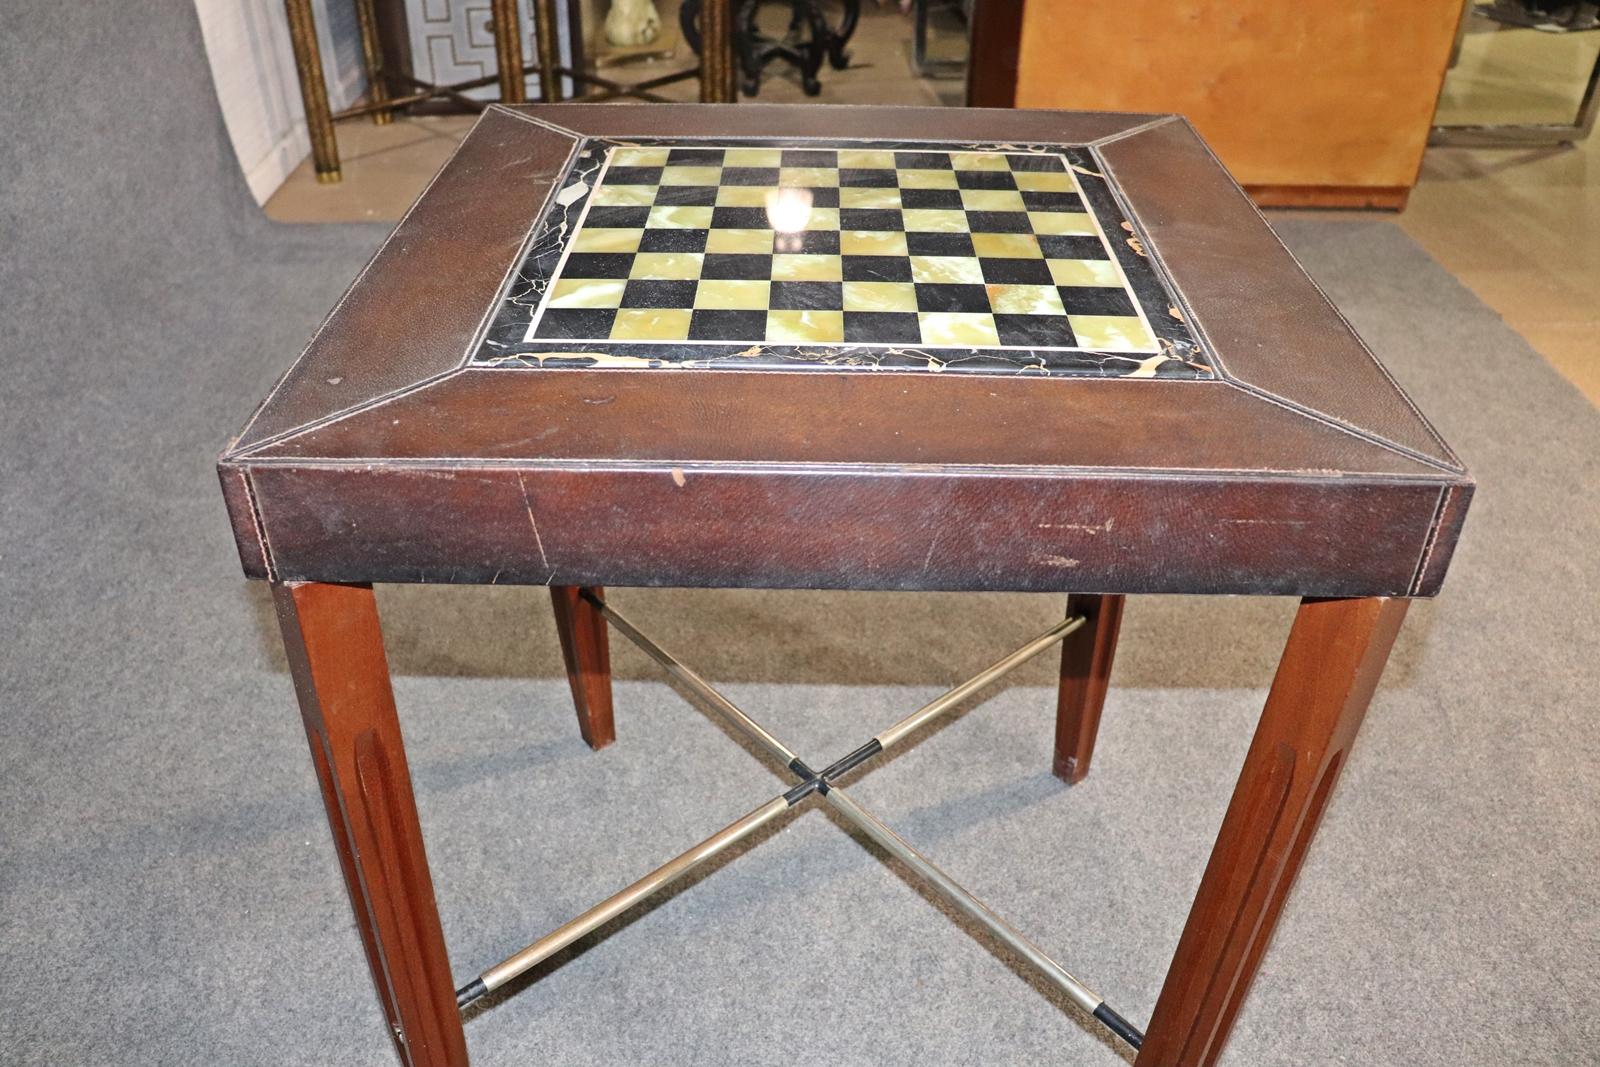 Metal Exceptional Quality Aldo Tura Style Onyx and Leather Games Tables with Pieces